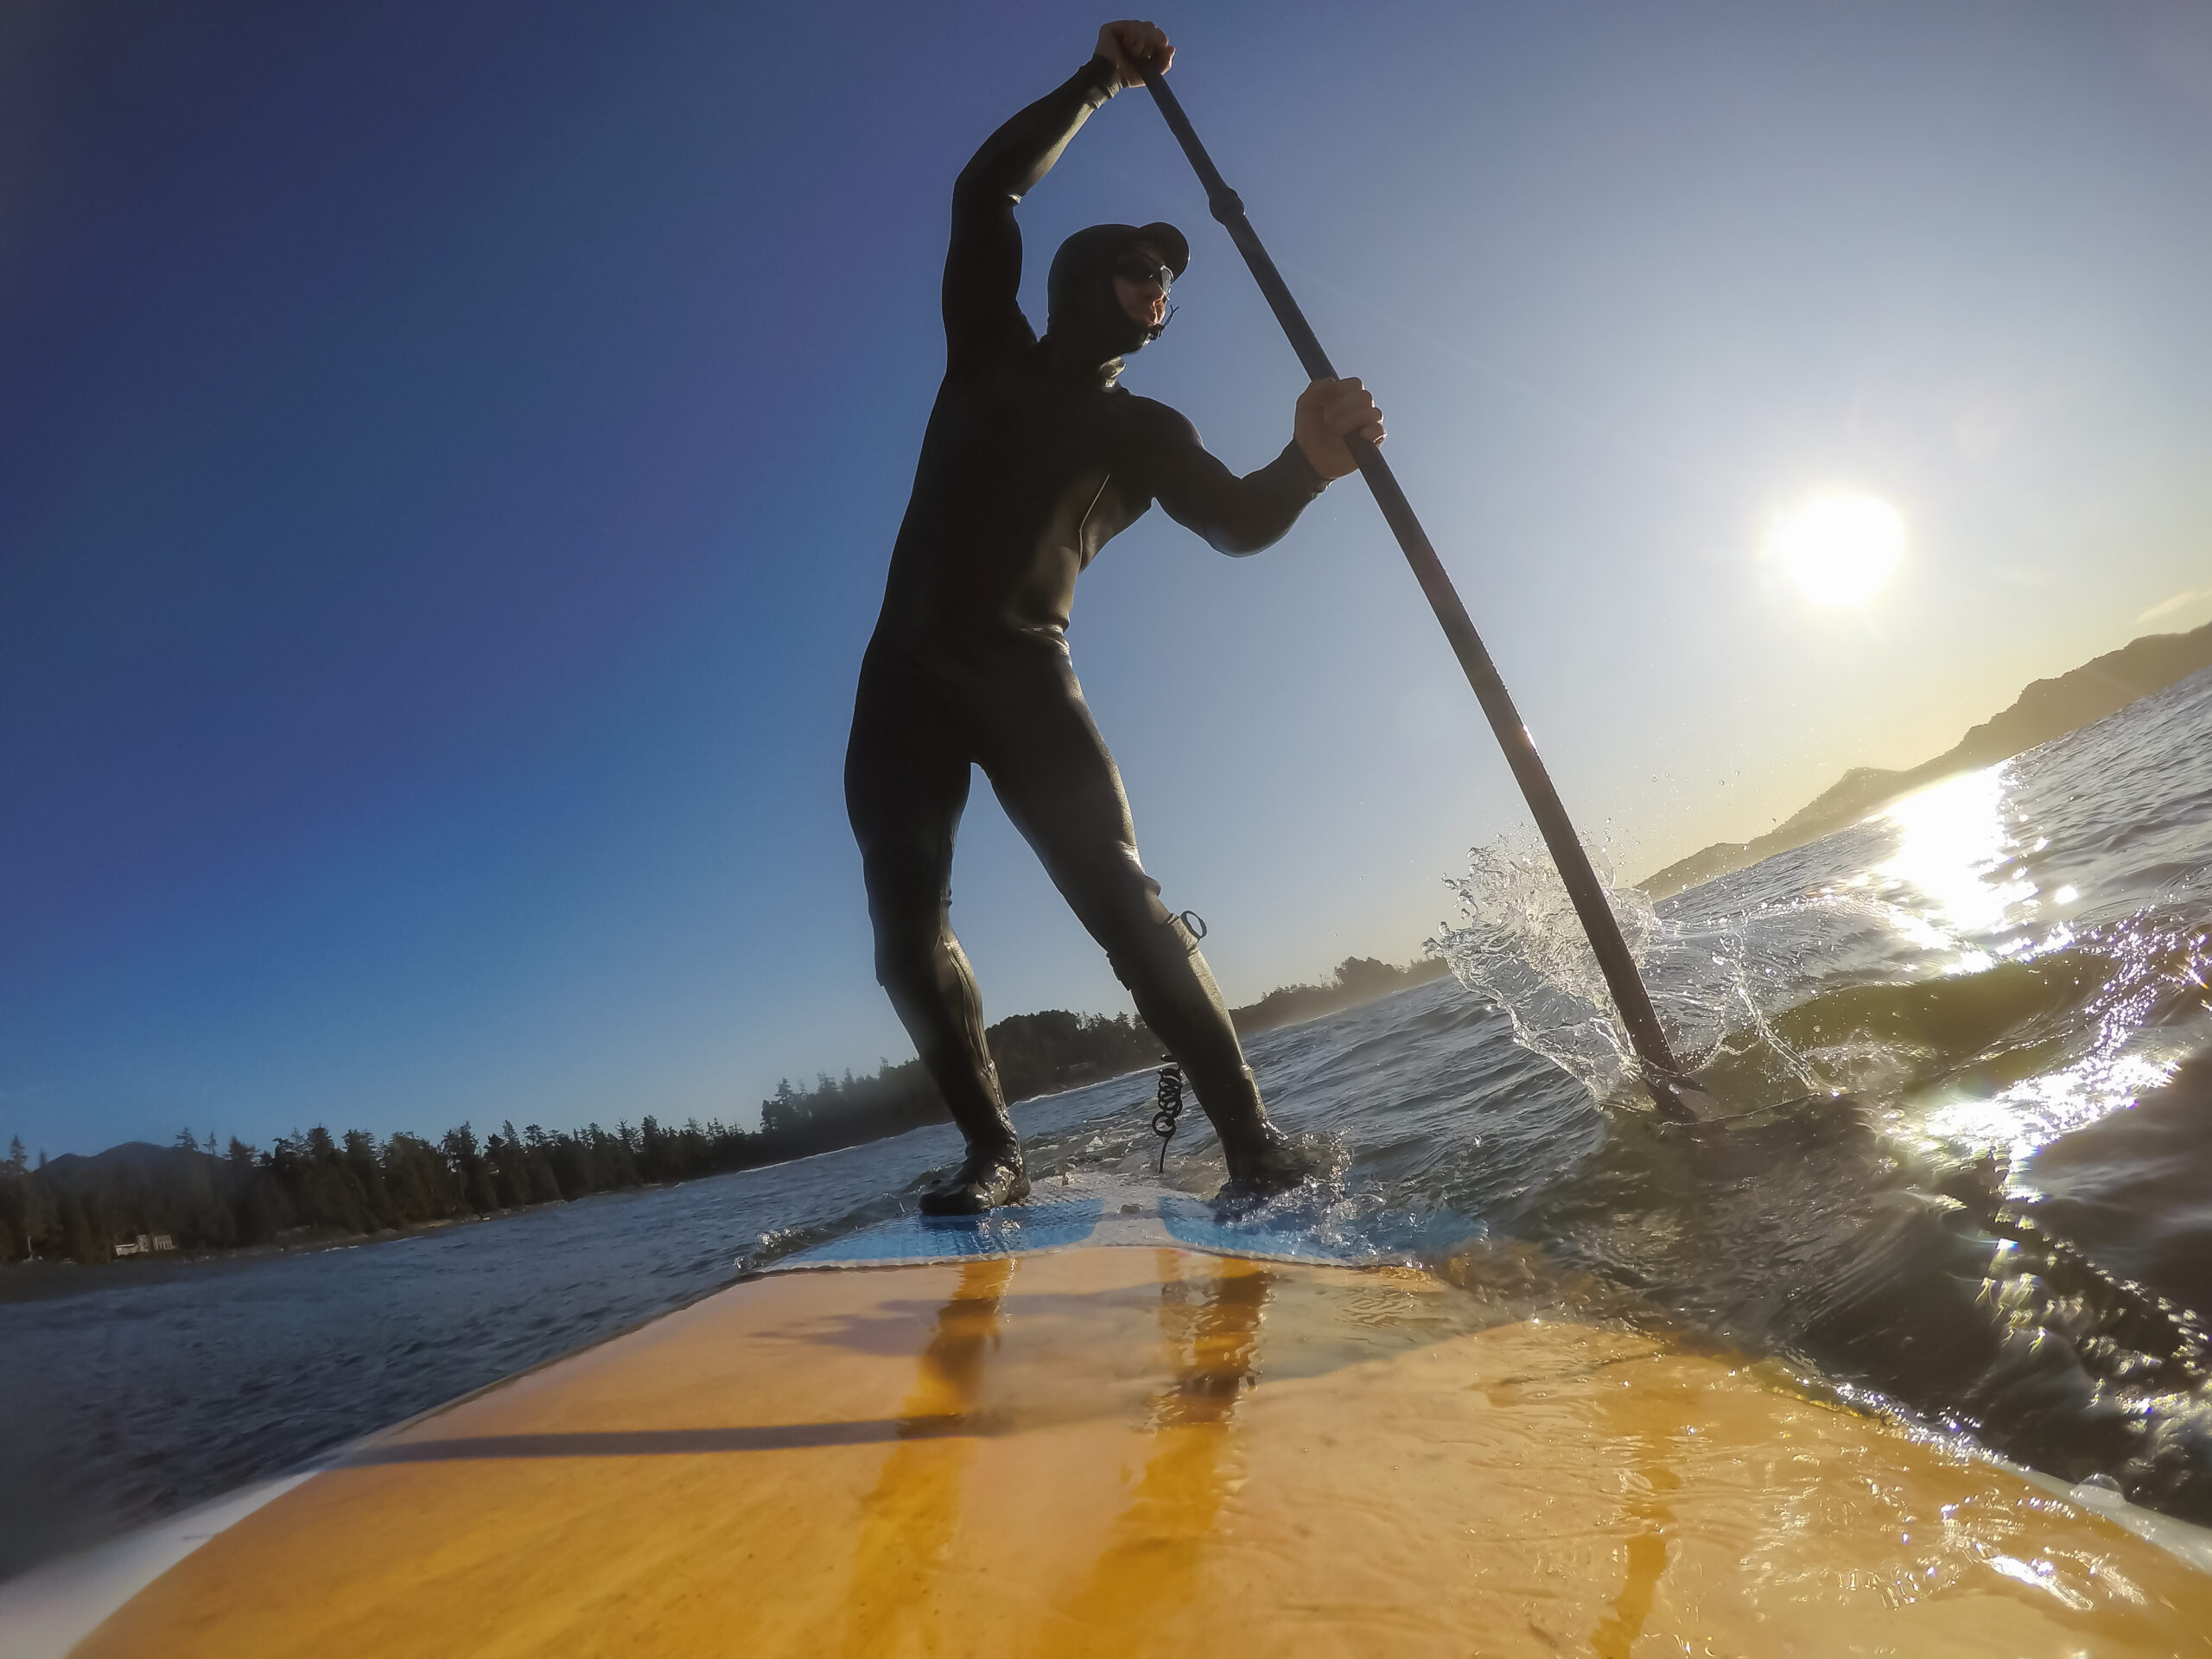 Differences between SUP (Stand Up Paddle) surf and regular surf lessons.